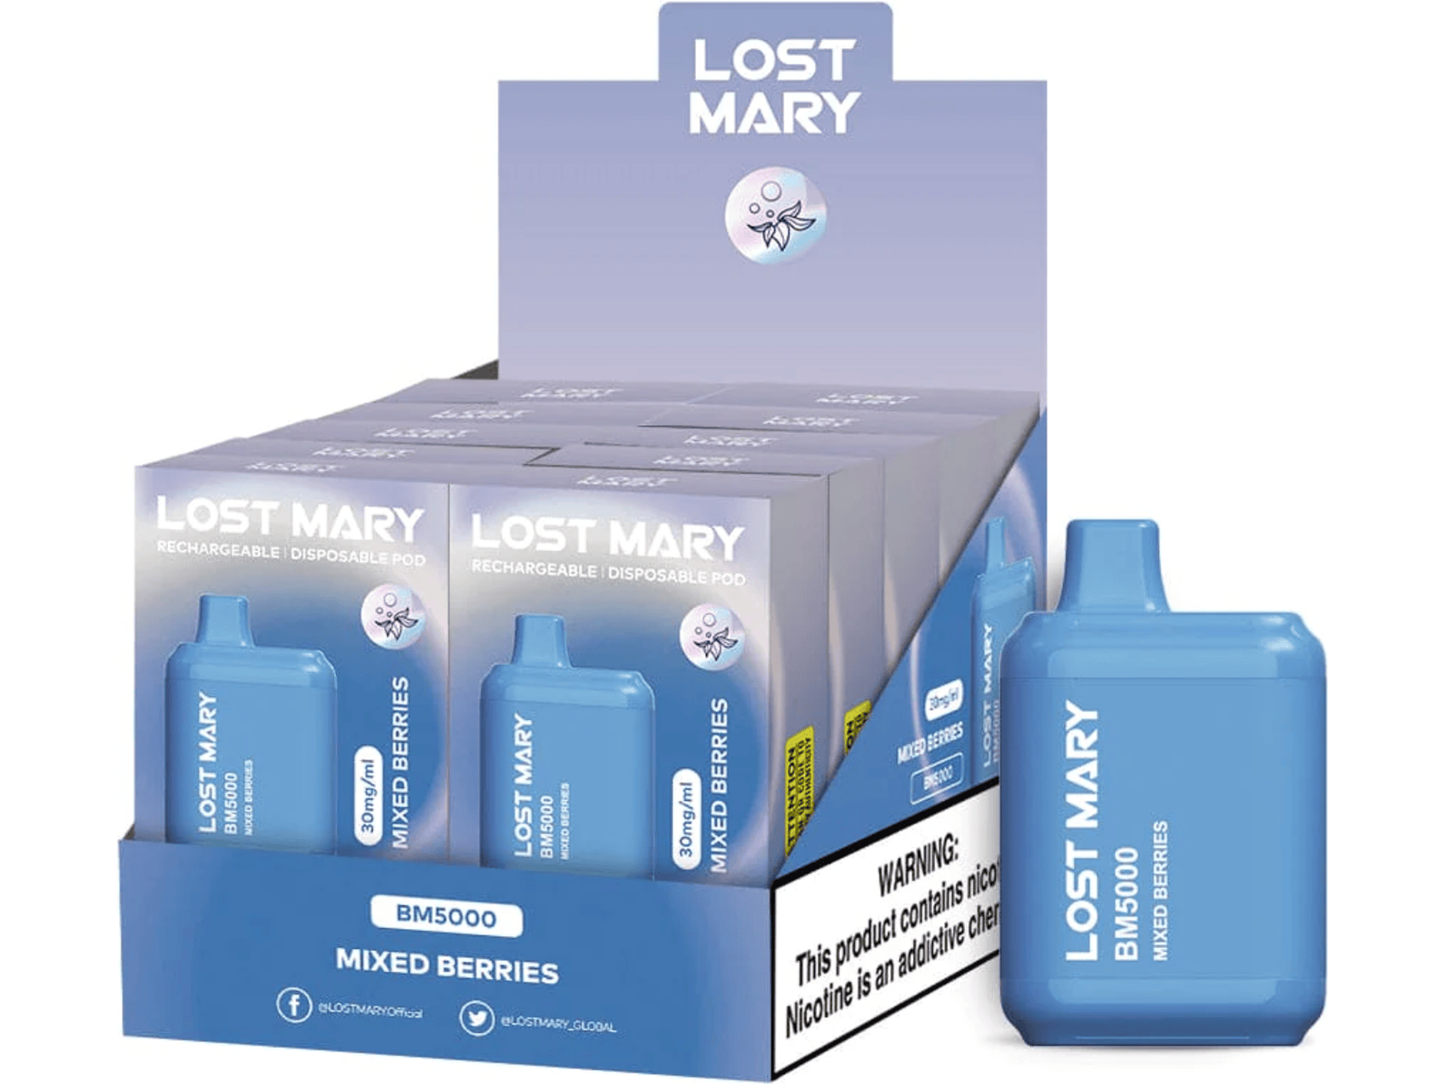 Lost Mary BM5000 Mixed Berries flavored disposable vape device and box.